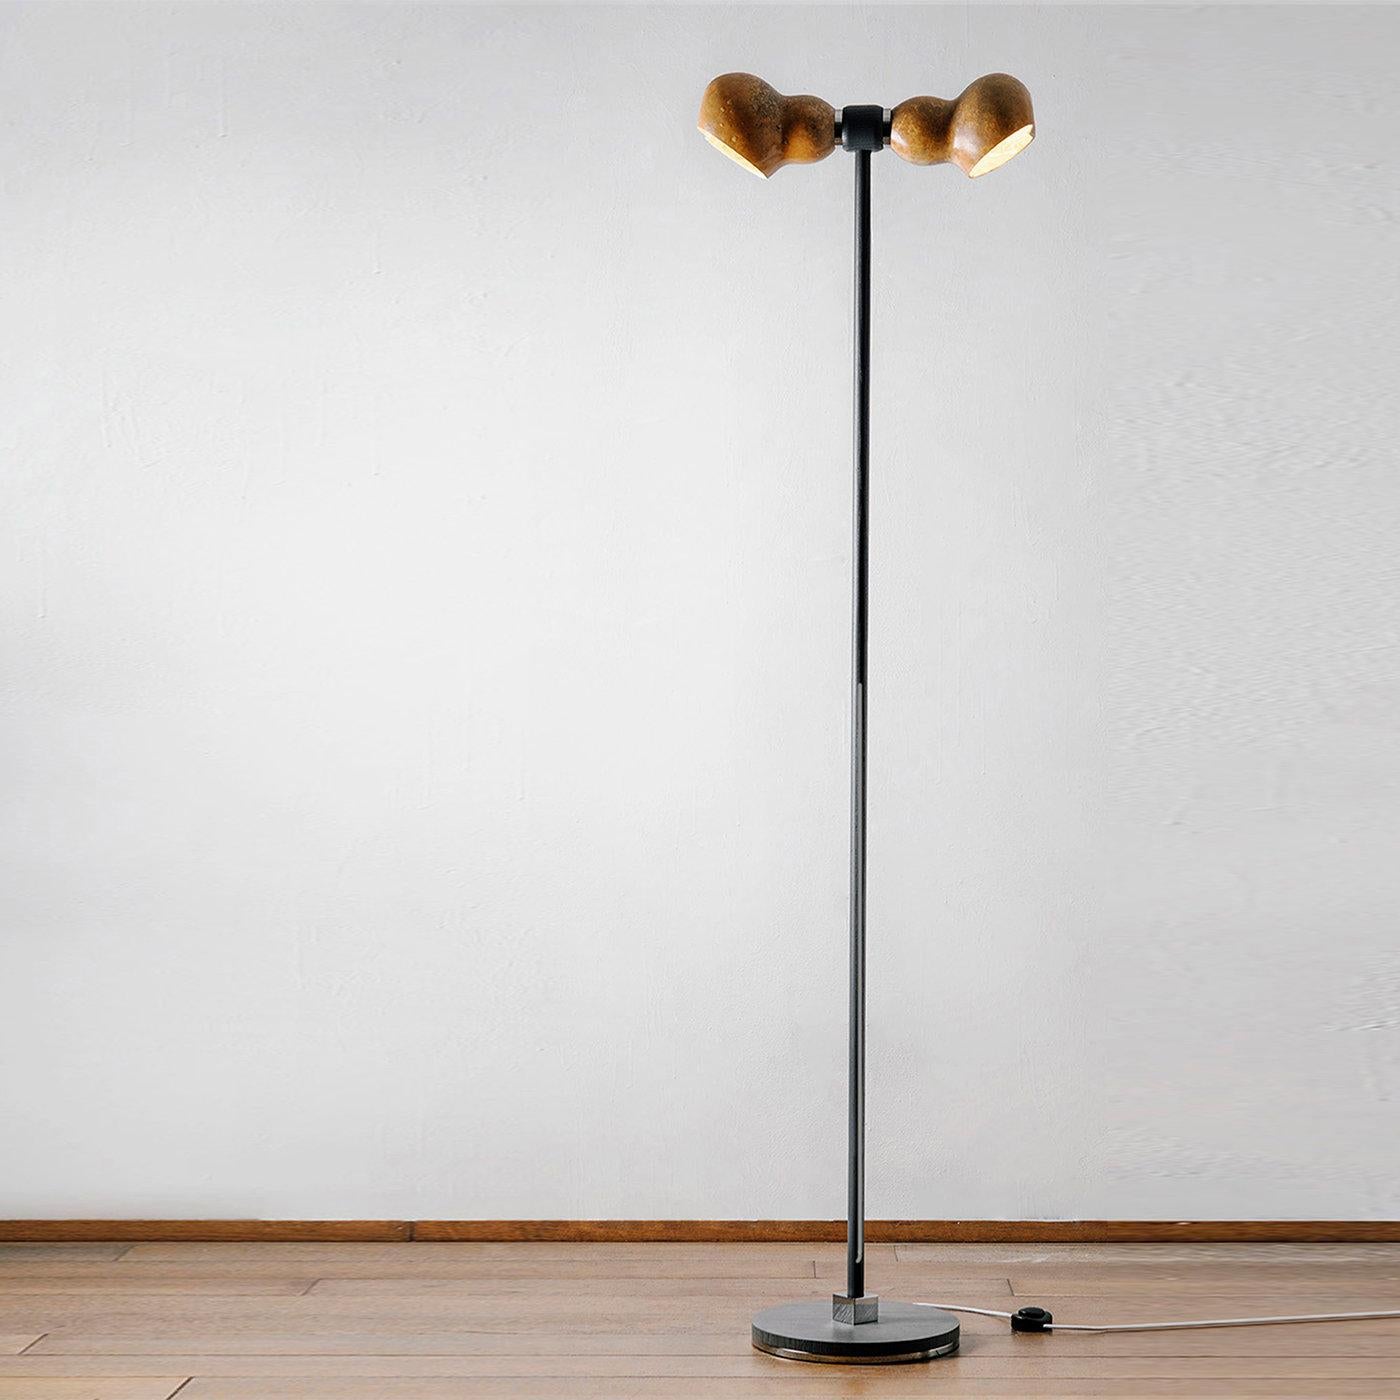 Dual is an elegant sustainable floor lamp made of water-painted ash wood, dried Lagenaria gourd and recycled copper. Its peculiarity is the harmony resulting from the sinuous and soft lines of the lamp. The supporting structure is enlivened by the